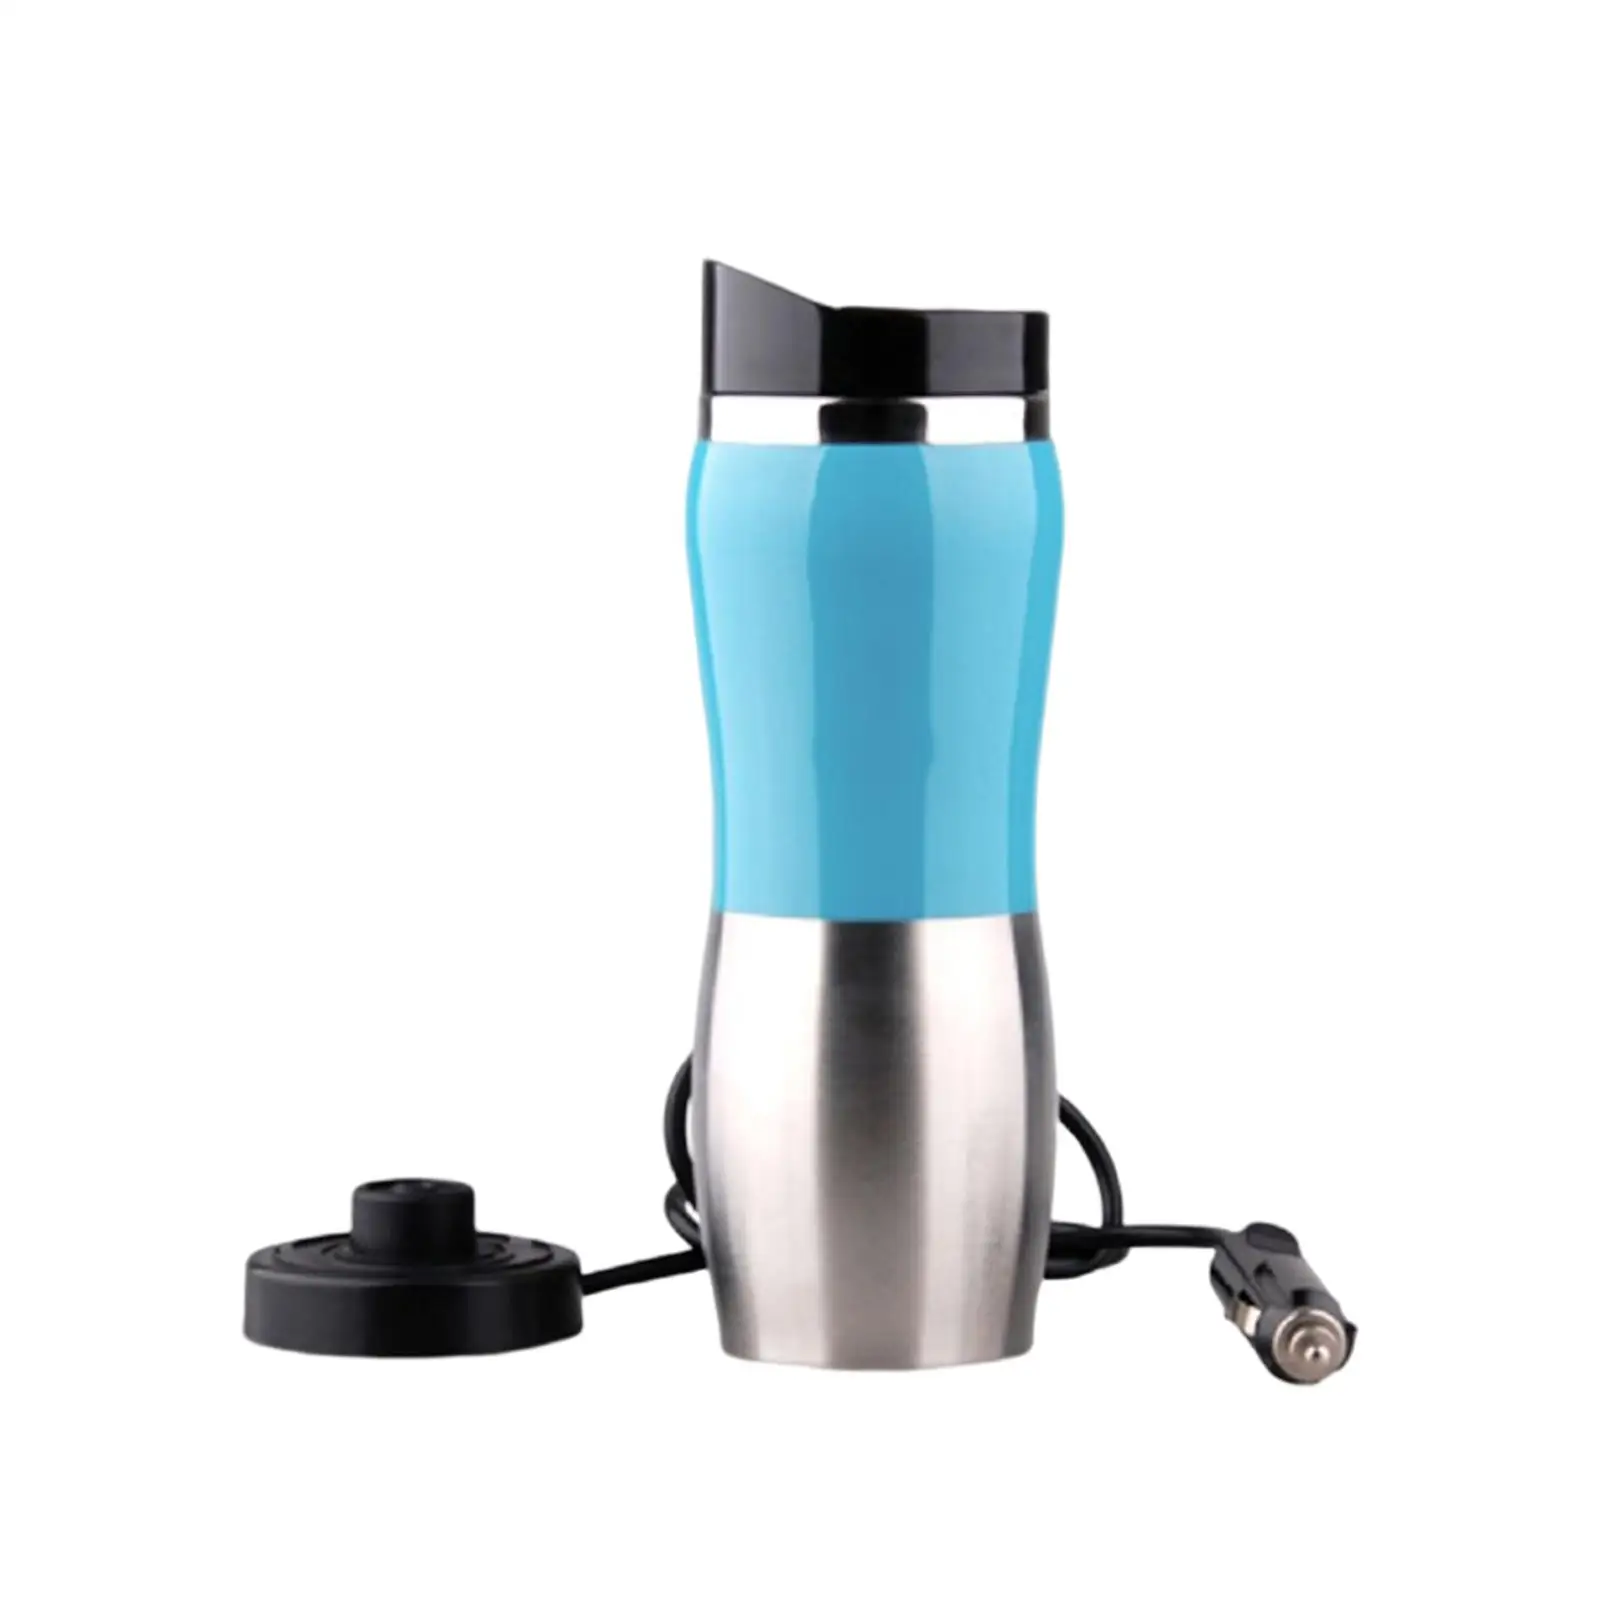  Kettle, 24V 400ml Portable, , Travel Heating Cup, Mug Auto Heating  for  Making Milk Travel Hot Water